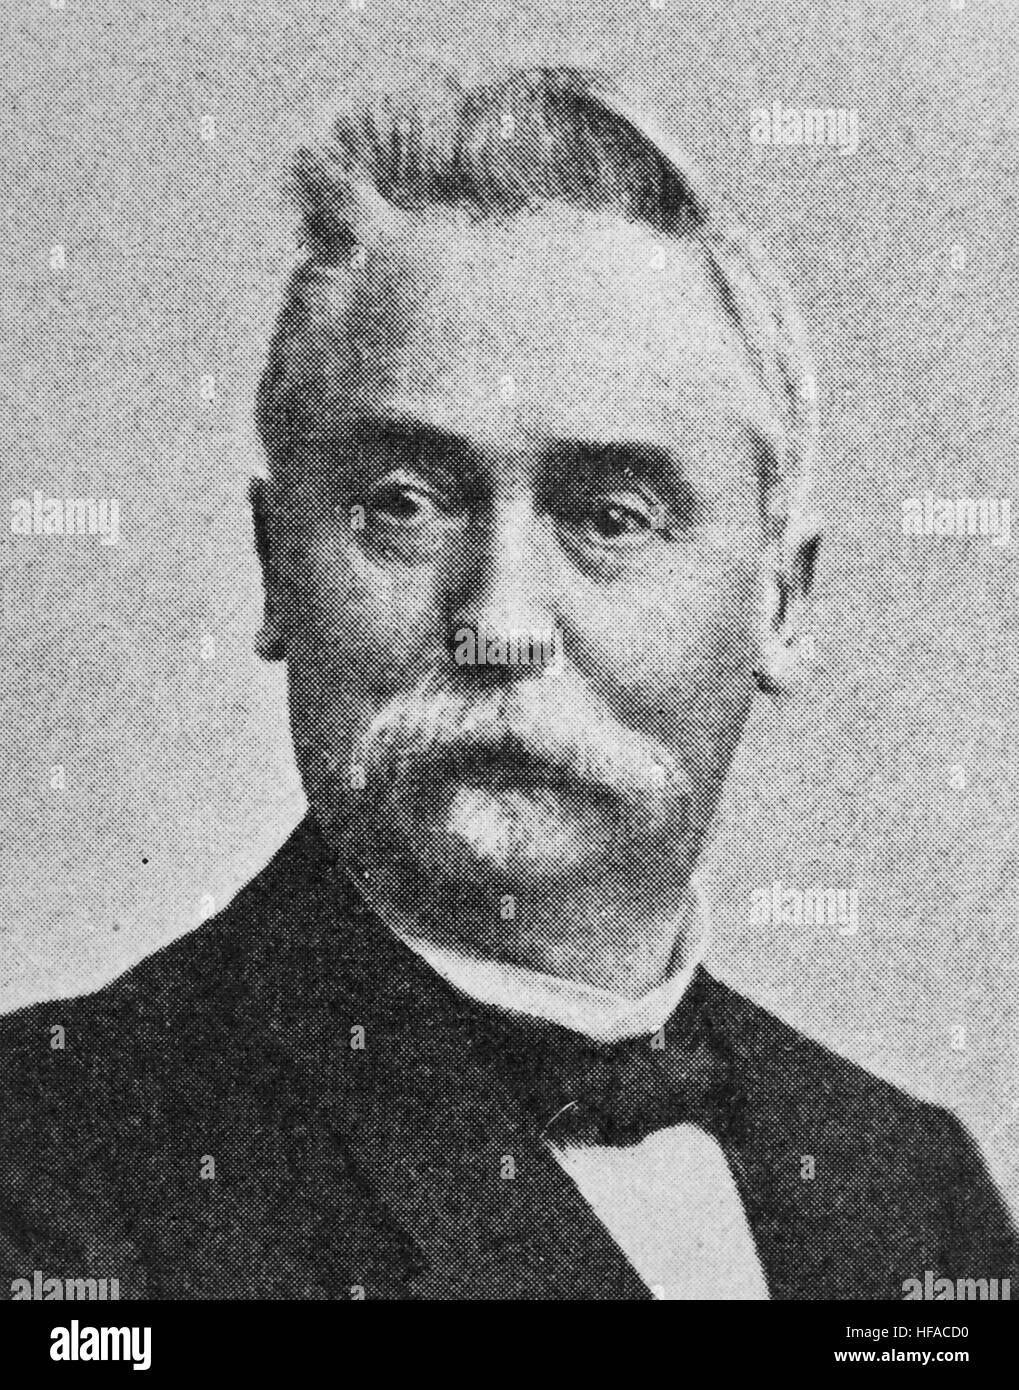 Albert Mooren, 1828-1899, a German ophthalmologist., reproduction photo from the year 1895, digital improved Stock Photo